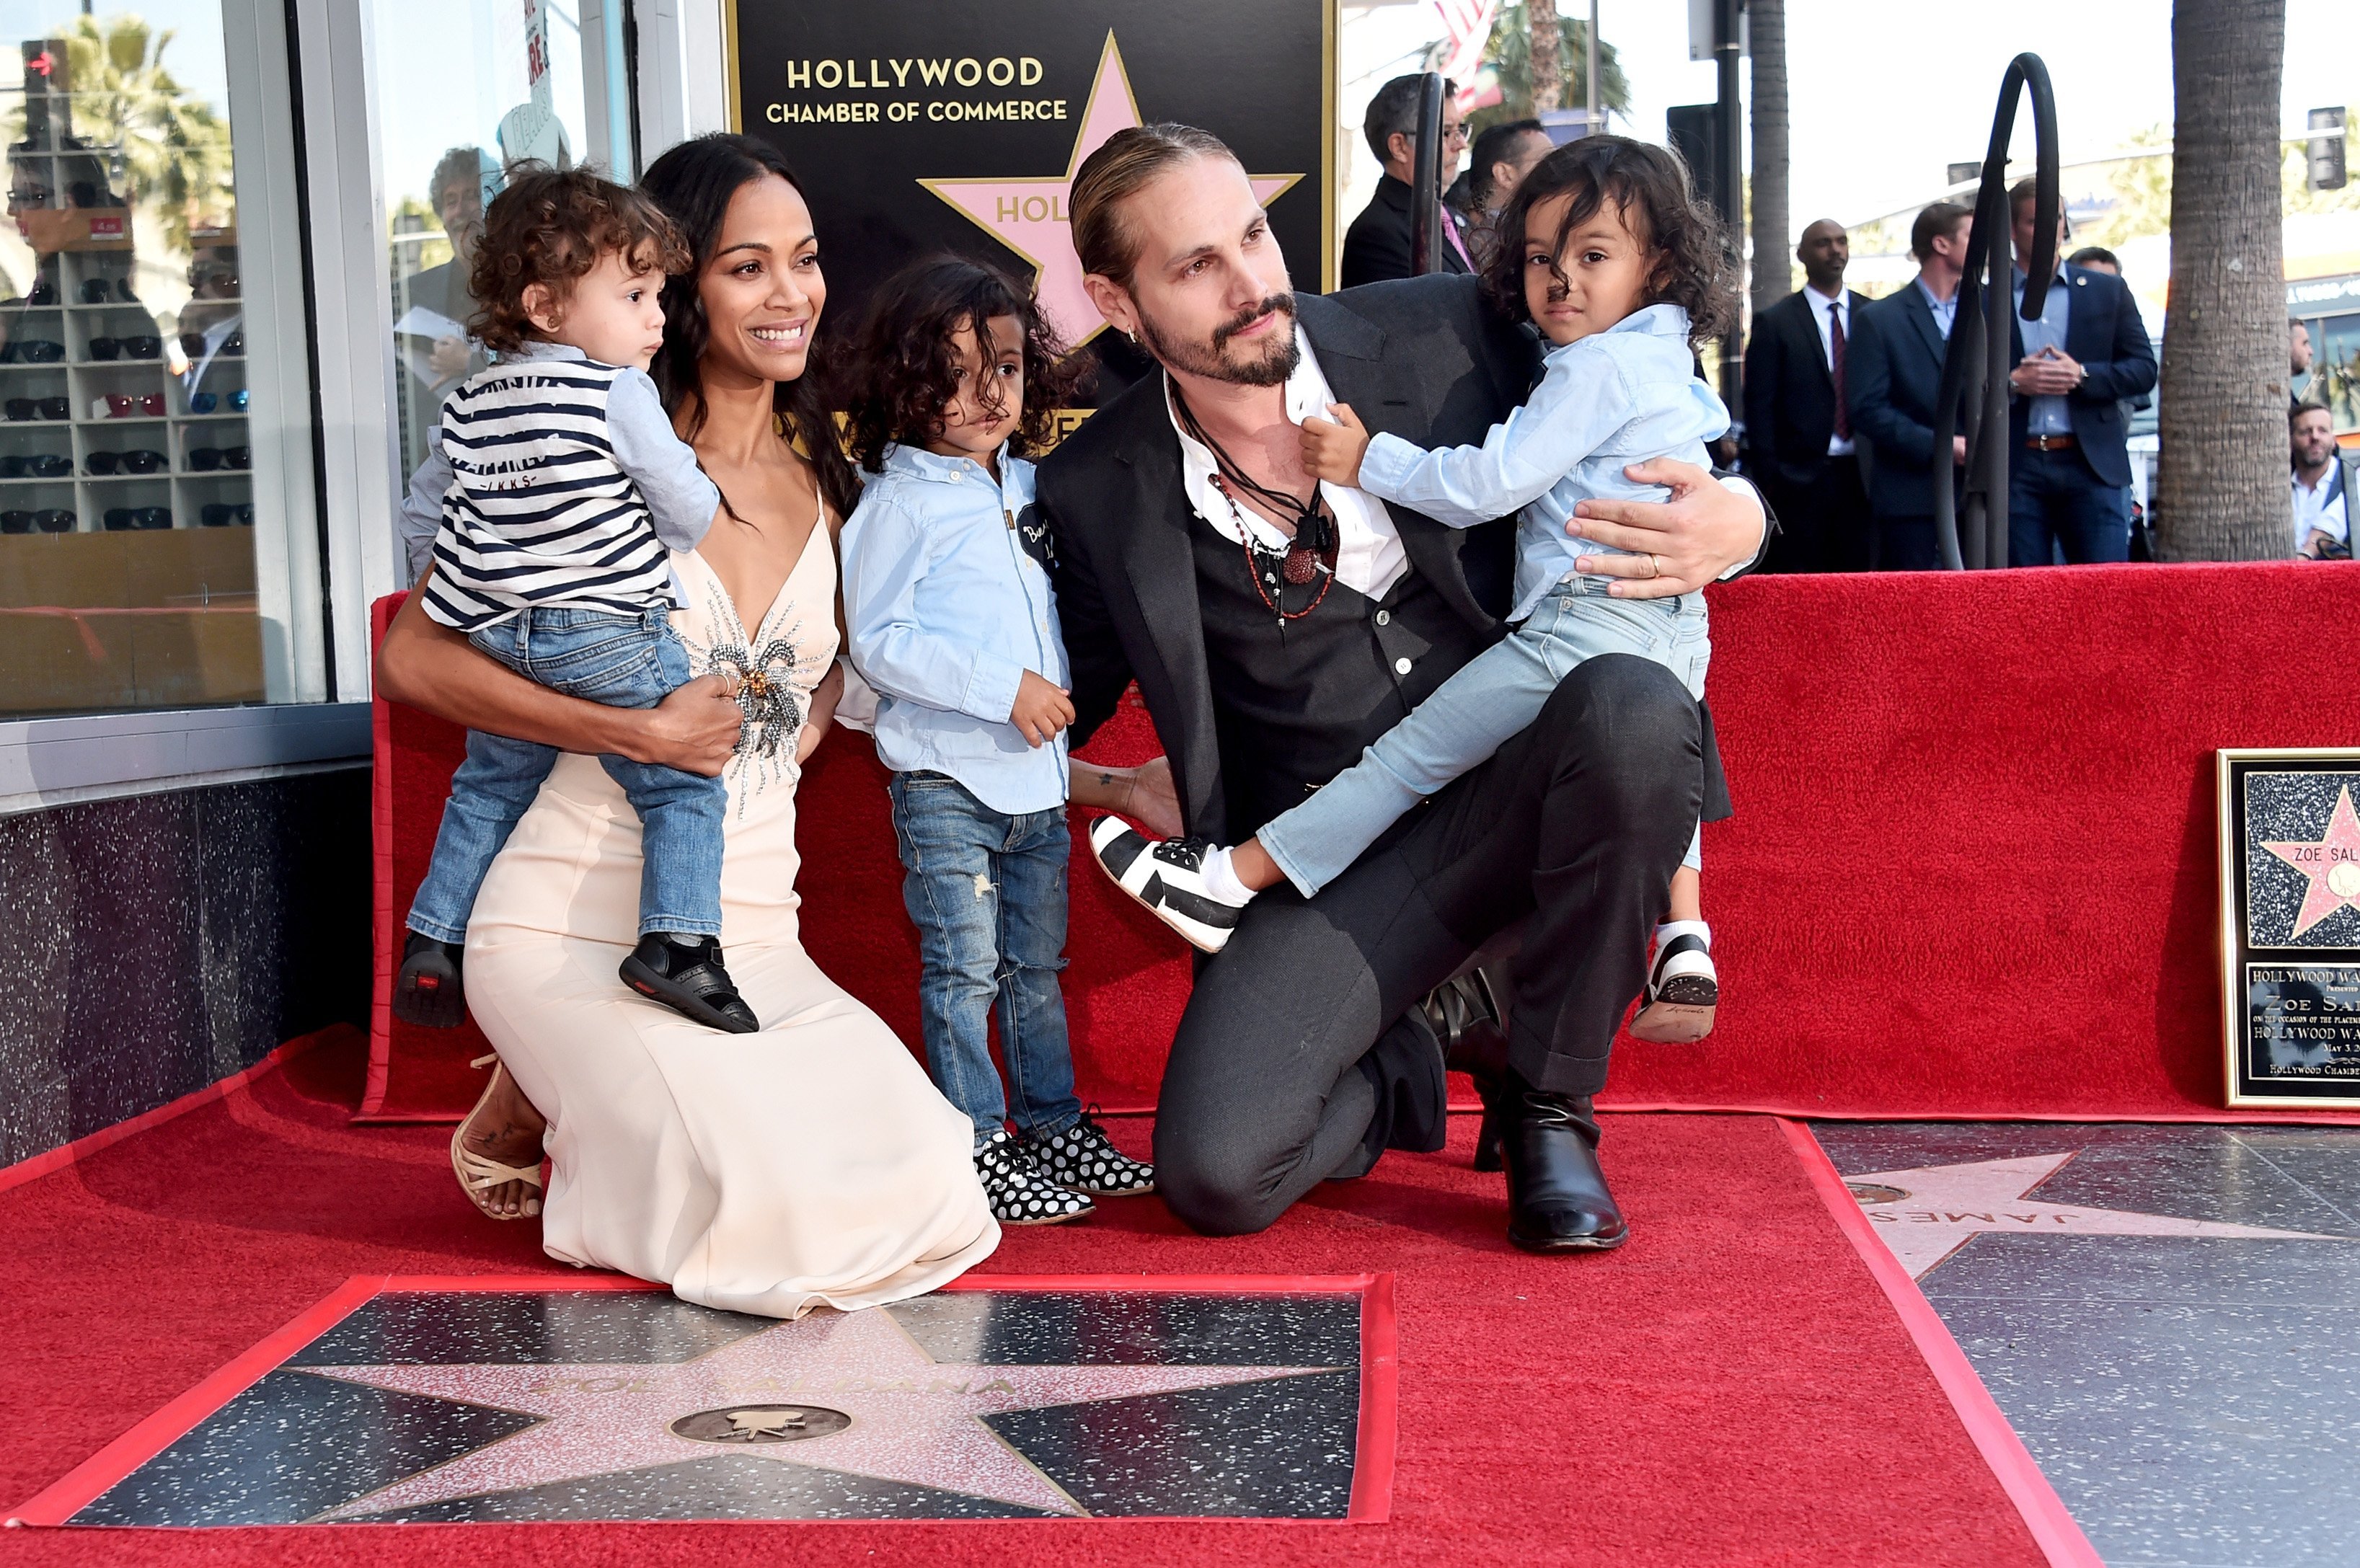 Zoe Saldana, Marco Perego, and children at the Zoe Saldana Walk Of Fame Star Ceremony on May 3, 2018 in Hollywood, California. | Photo: GettyImages